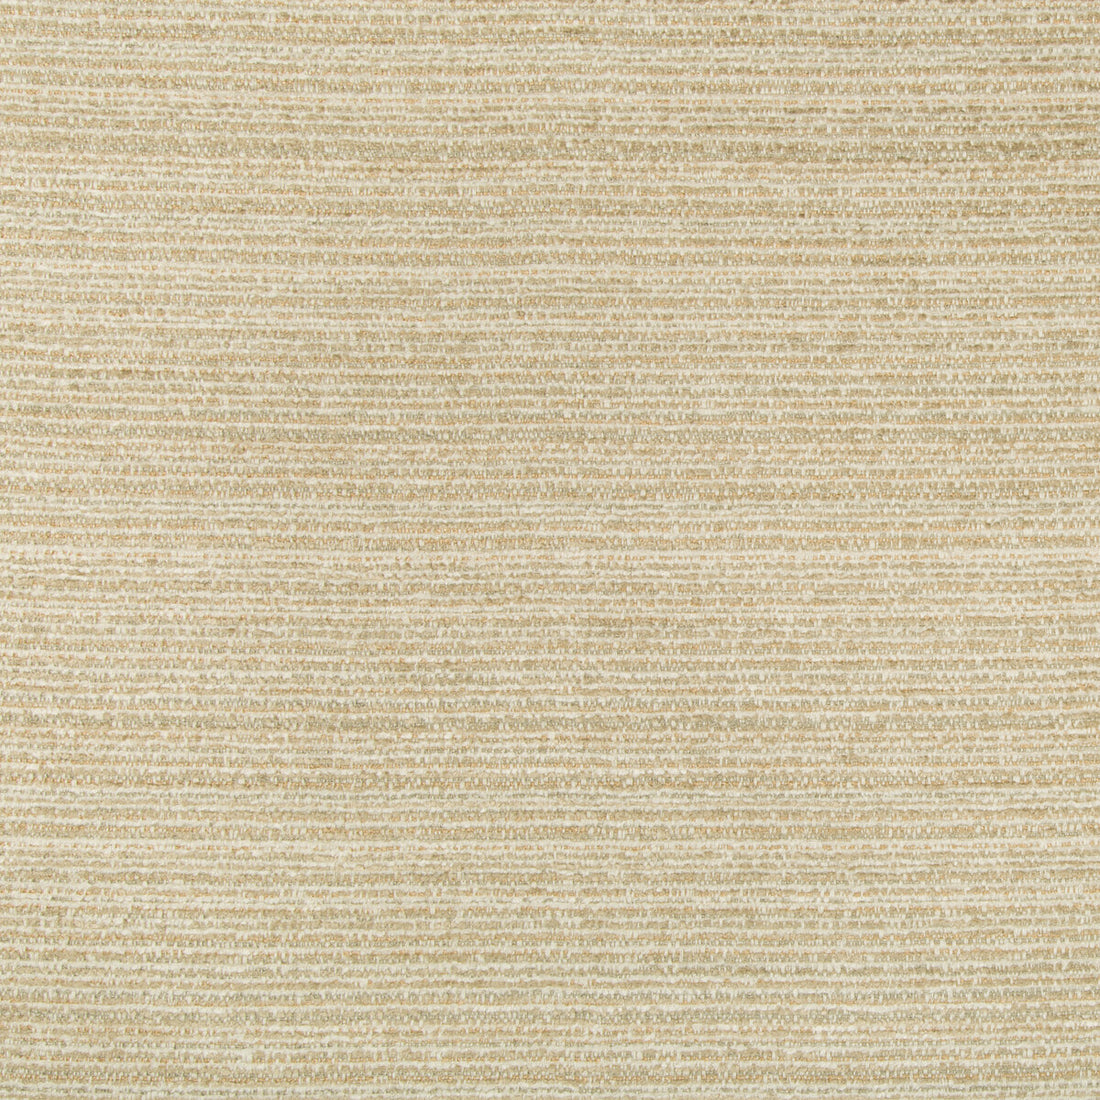 Kravet Design fabric in 34995-16 color - pattern 34995.16.0 - by Kravet Design in the Performance Crypton Home collection